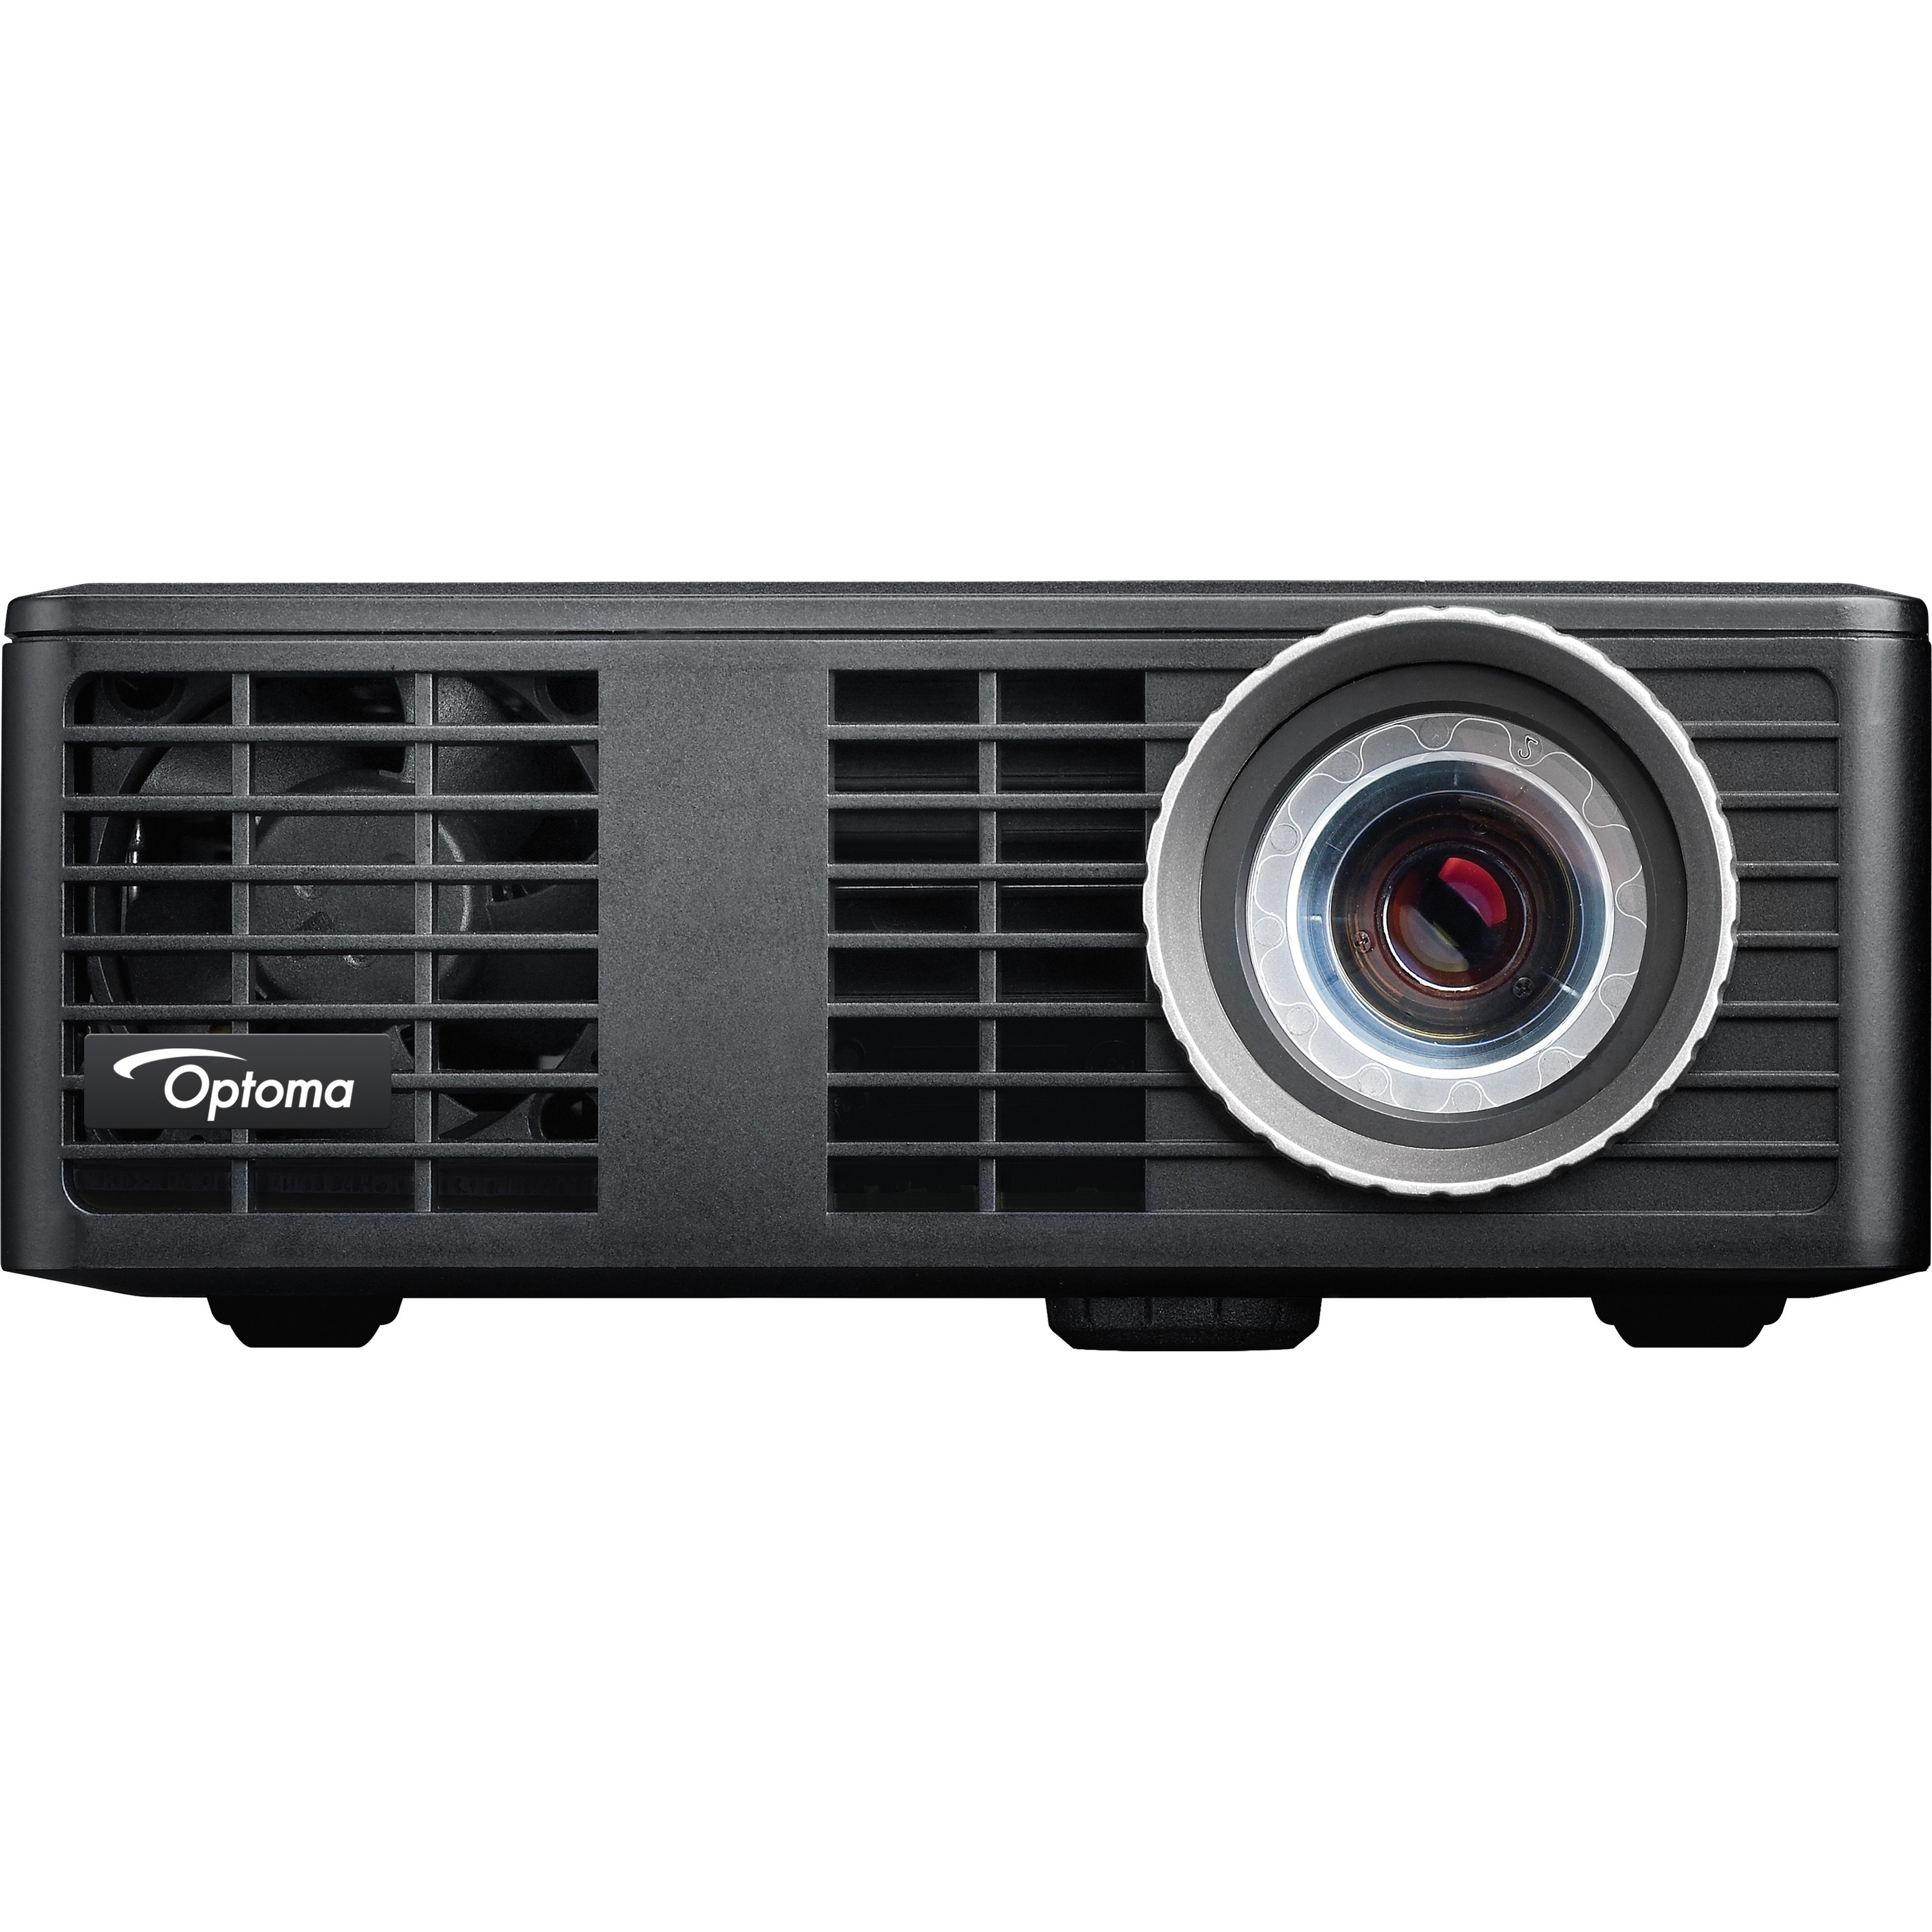 Optoma 500 Lumen 3D Ready DLP LED Projector with MHL HDMI Port